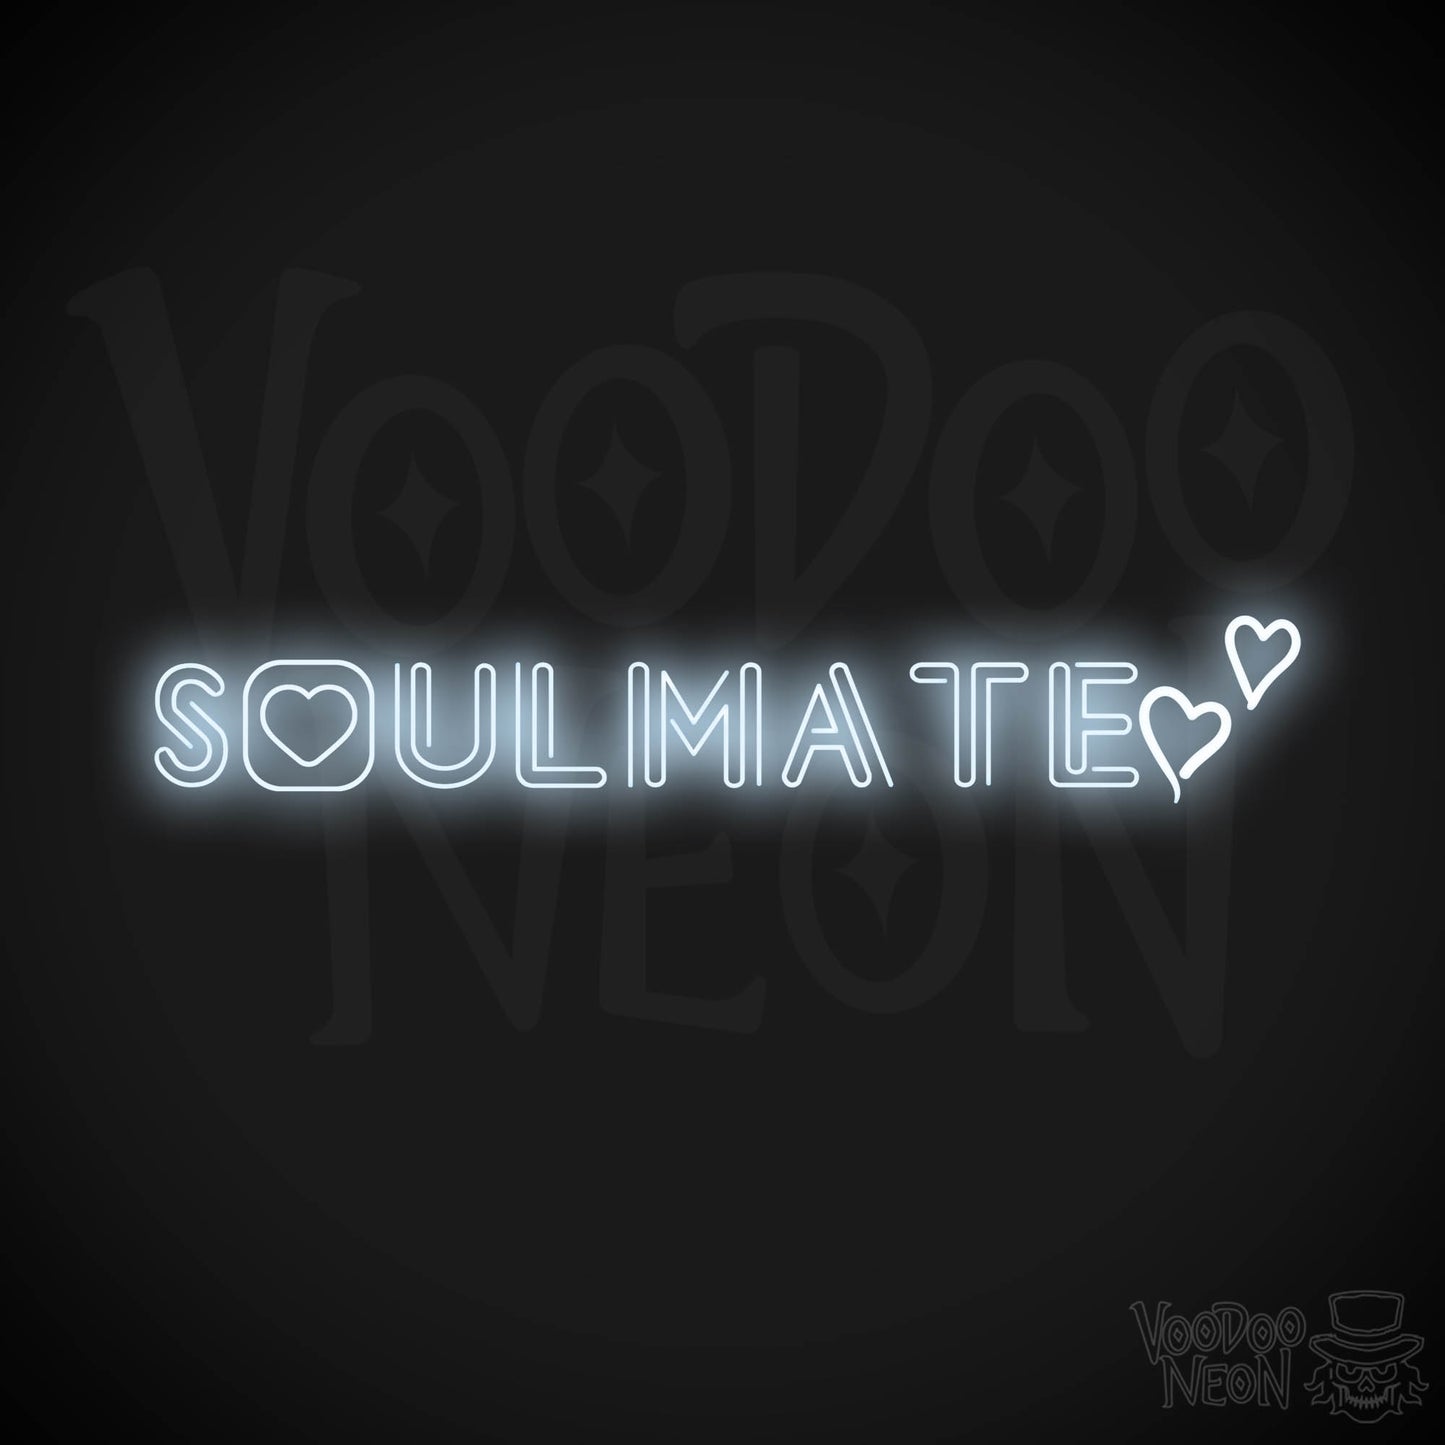 Soulmate Neon Sign - Neon Soulmate Sign - LED Neon Wall Art - Color Cool White